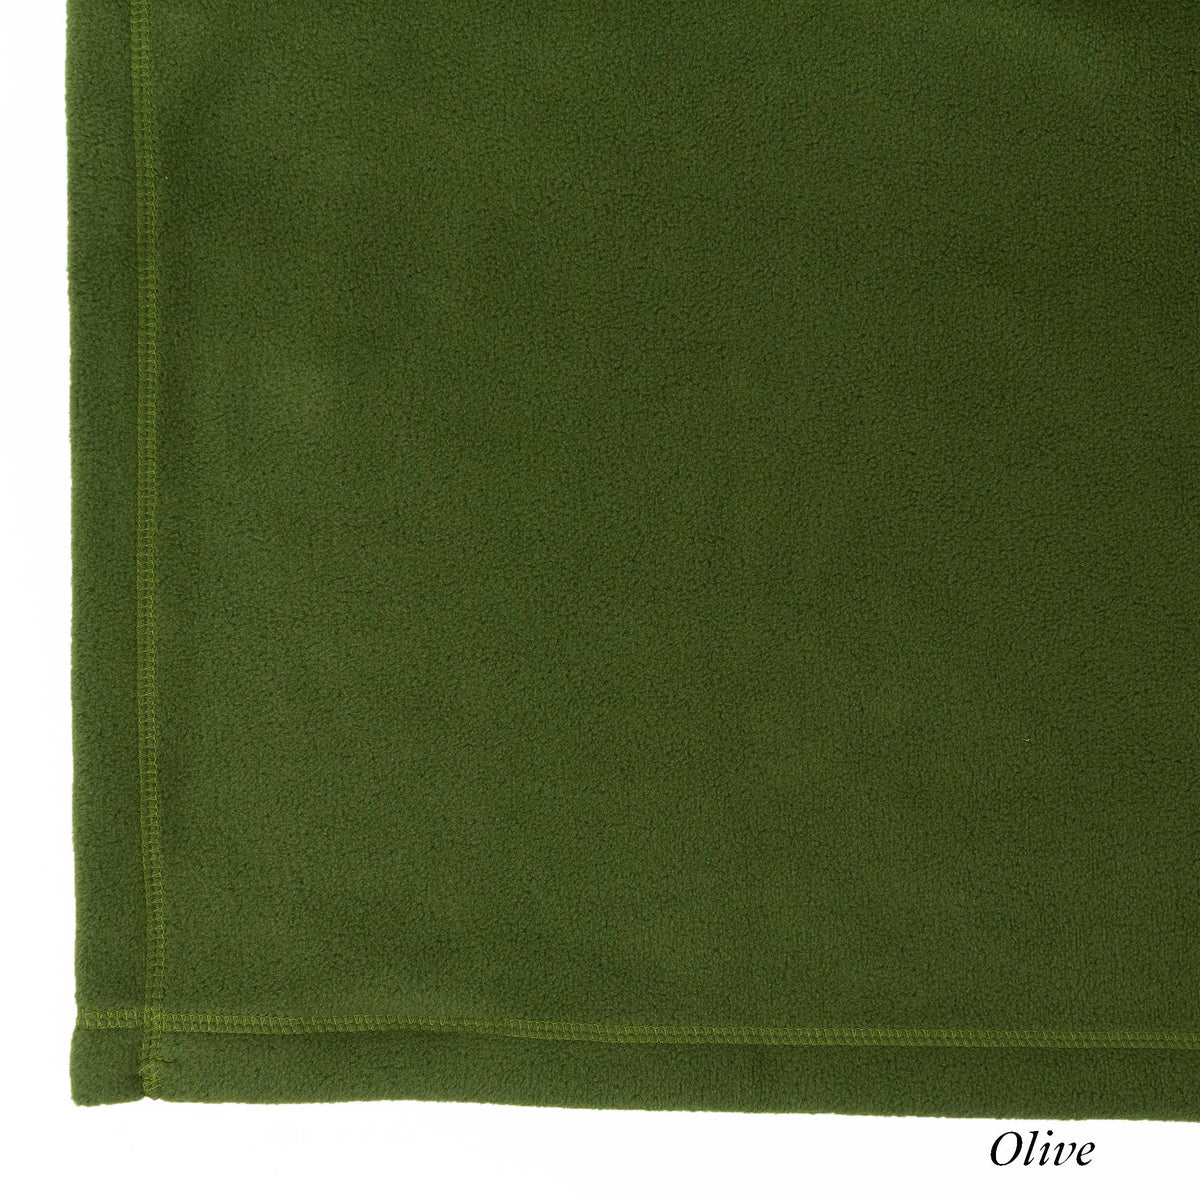 Olive  - Biggest, Oversized, Fleece Blankets - Peaceful Touch